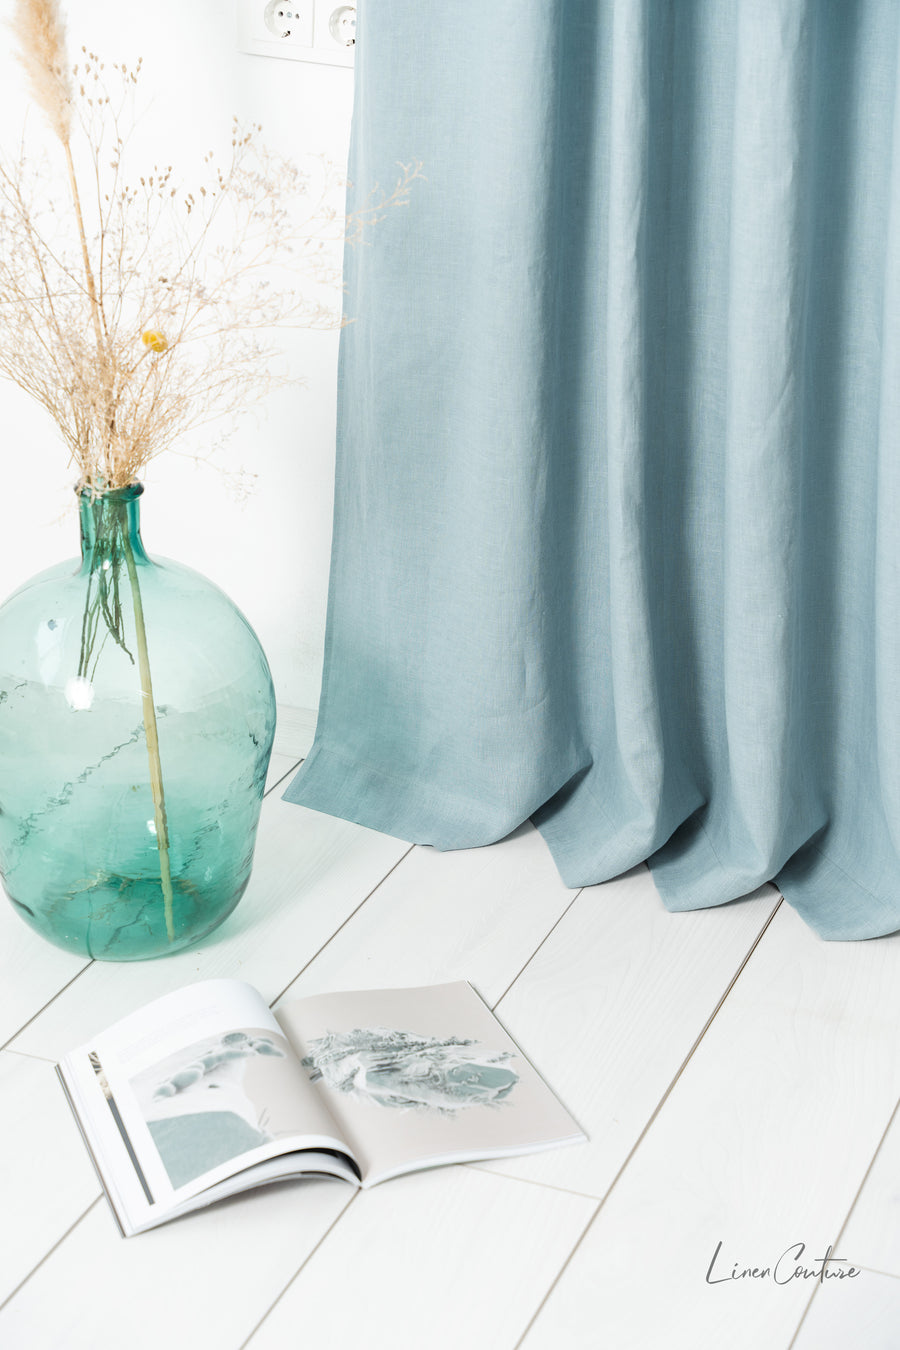 Greyish Mint linen curtain with tabs - Linen Couture Boutique